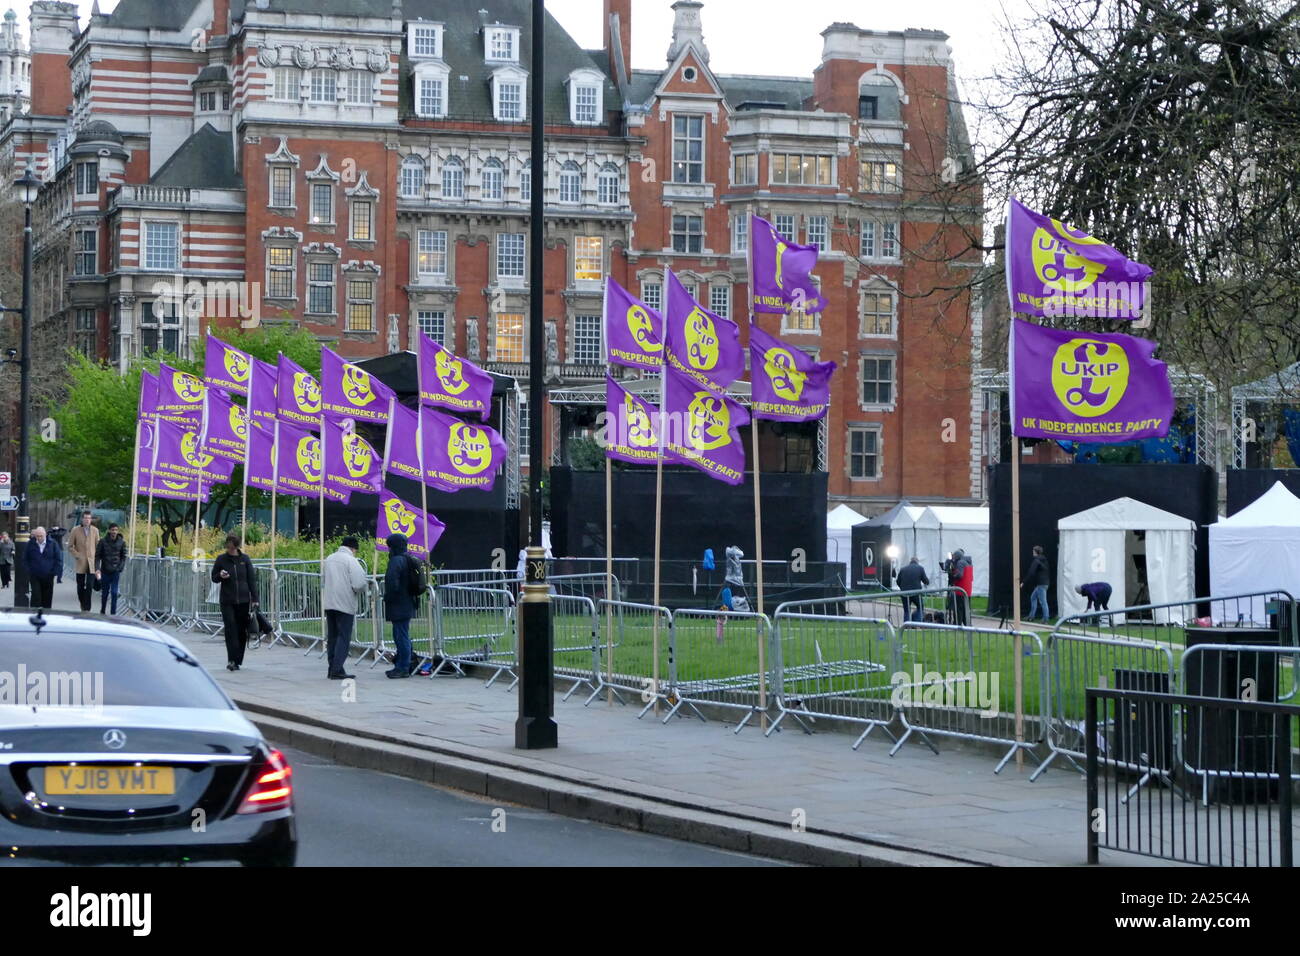 Brexit campaign. 'UKIP' (United Kingdom Independence Party) flags displayed opposite Parliament in London, April 2019.Brexit is the process of the withdrawal of the United Kingdom (UK) from the European Union (EU). Following a referendum held on 23 June 2016 in which 51.9 per cent of those voting supported leaving the EU Stock Photo